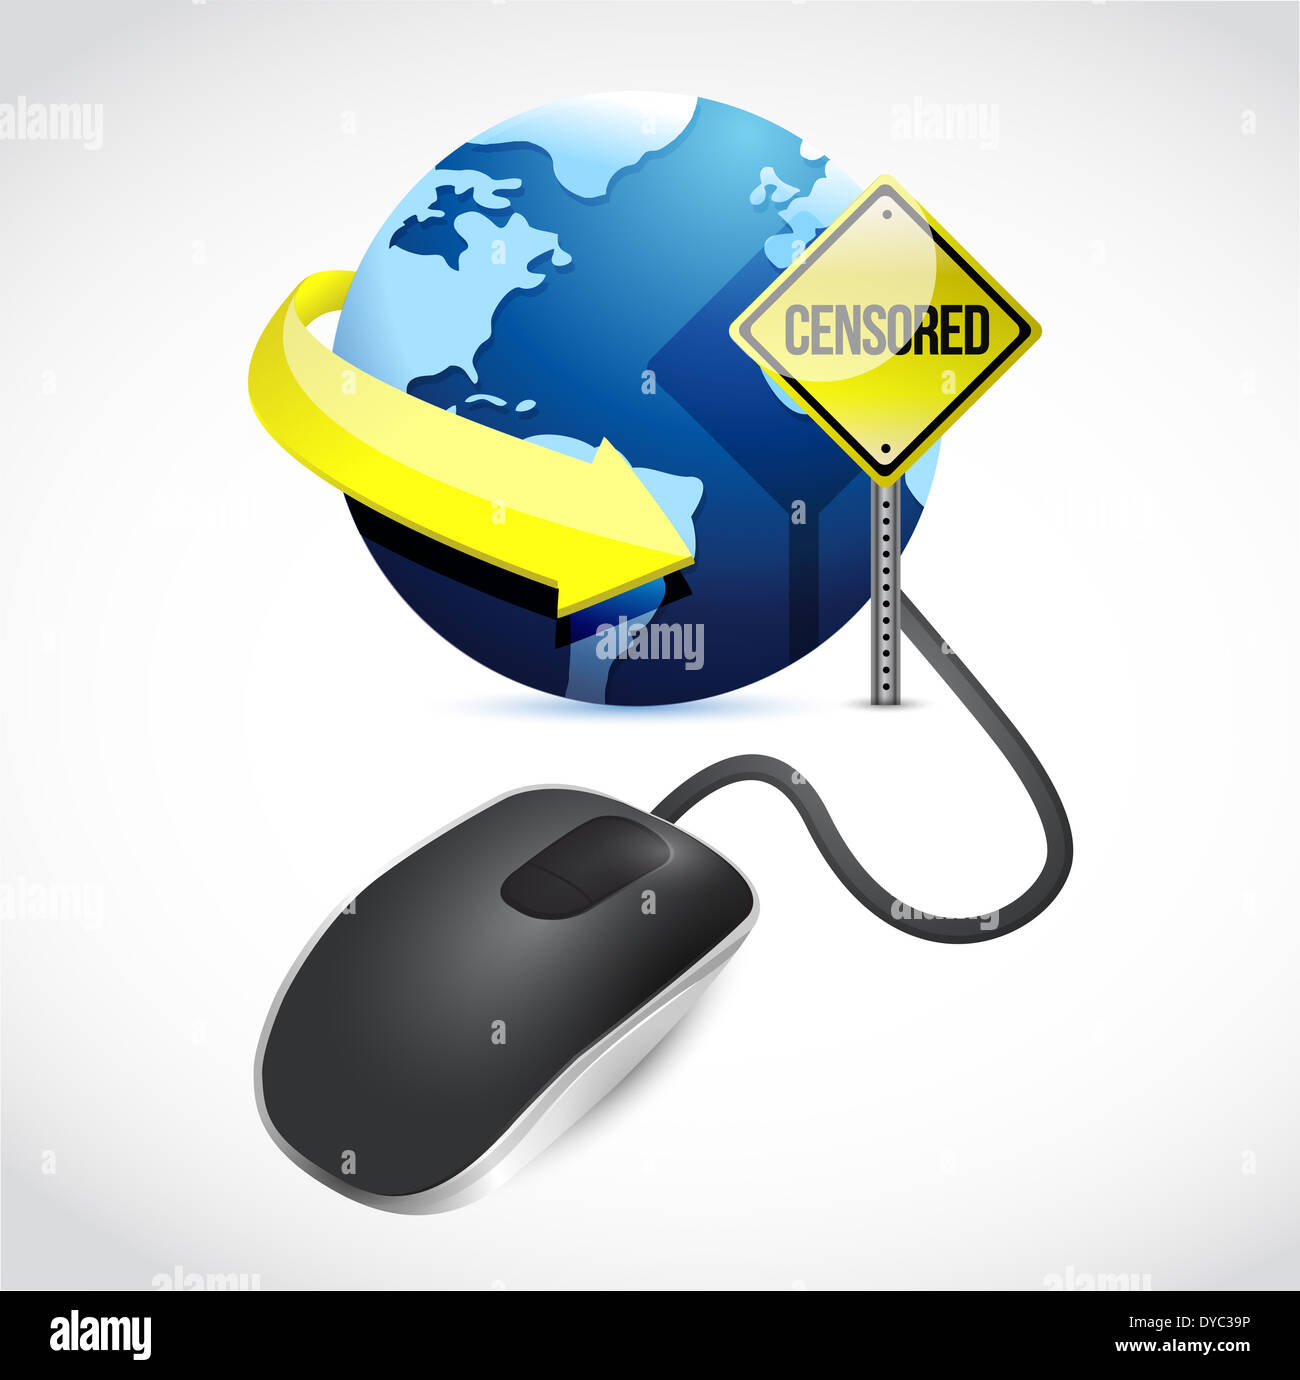 censored connection concept sign and mouse illustration design over white Stock Photo